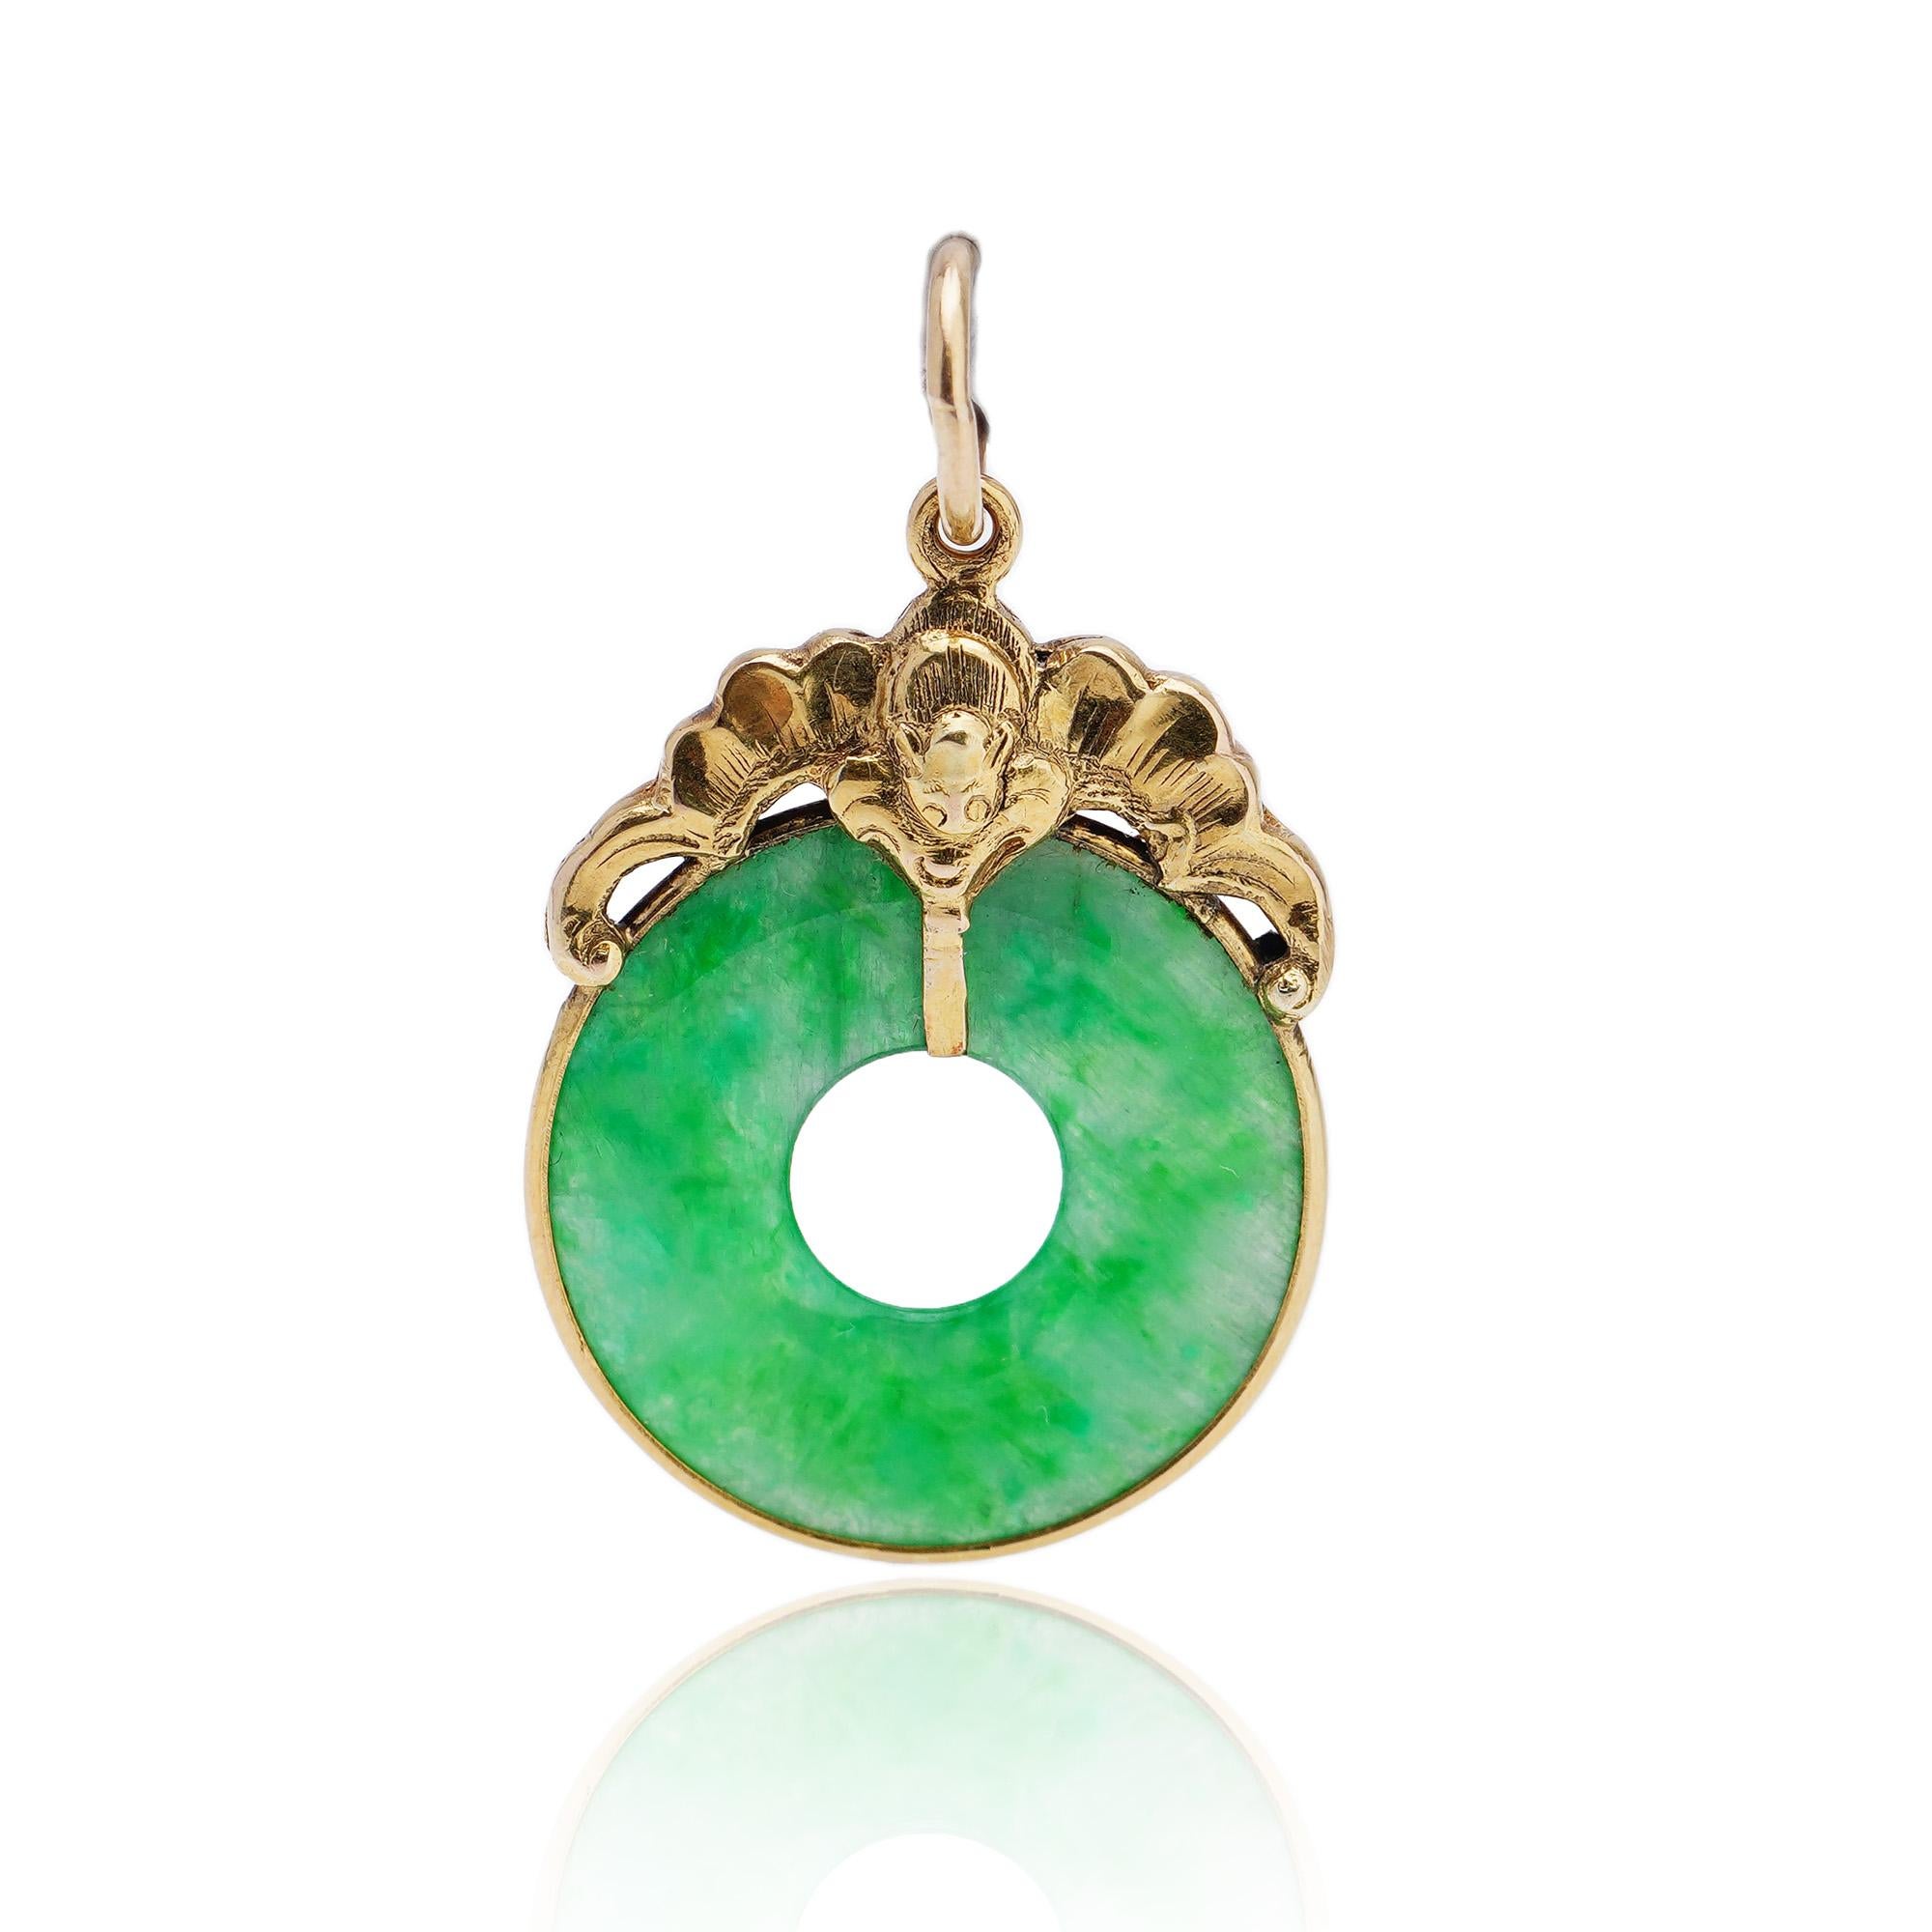 This is a beautiful vintage 18kt. yellow gold and donut circle jade pendant, it is mounted in 18kt. gold in a shape of a bat. 
Made in the 1950s, it is been tested positive for 18kt. gold. 

Dimensions -
3.2 x 1.9 x 0.1 cm 
Weight: 3.05